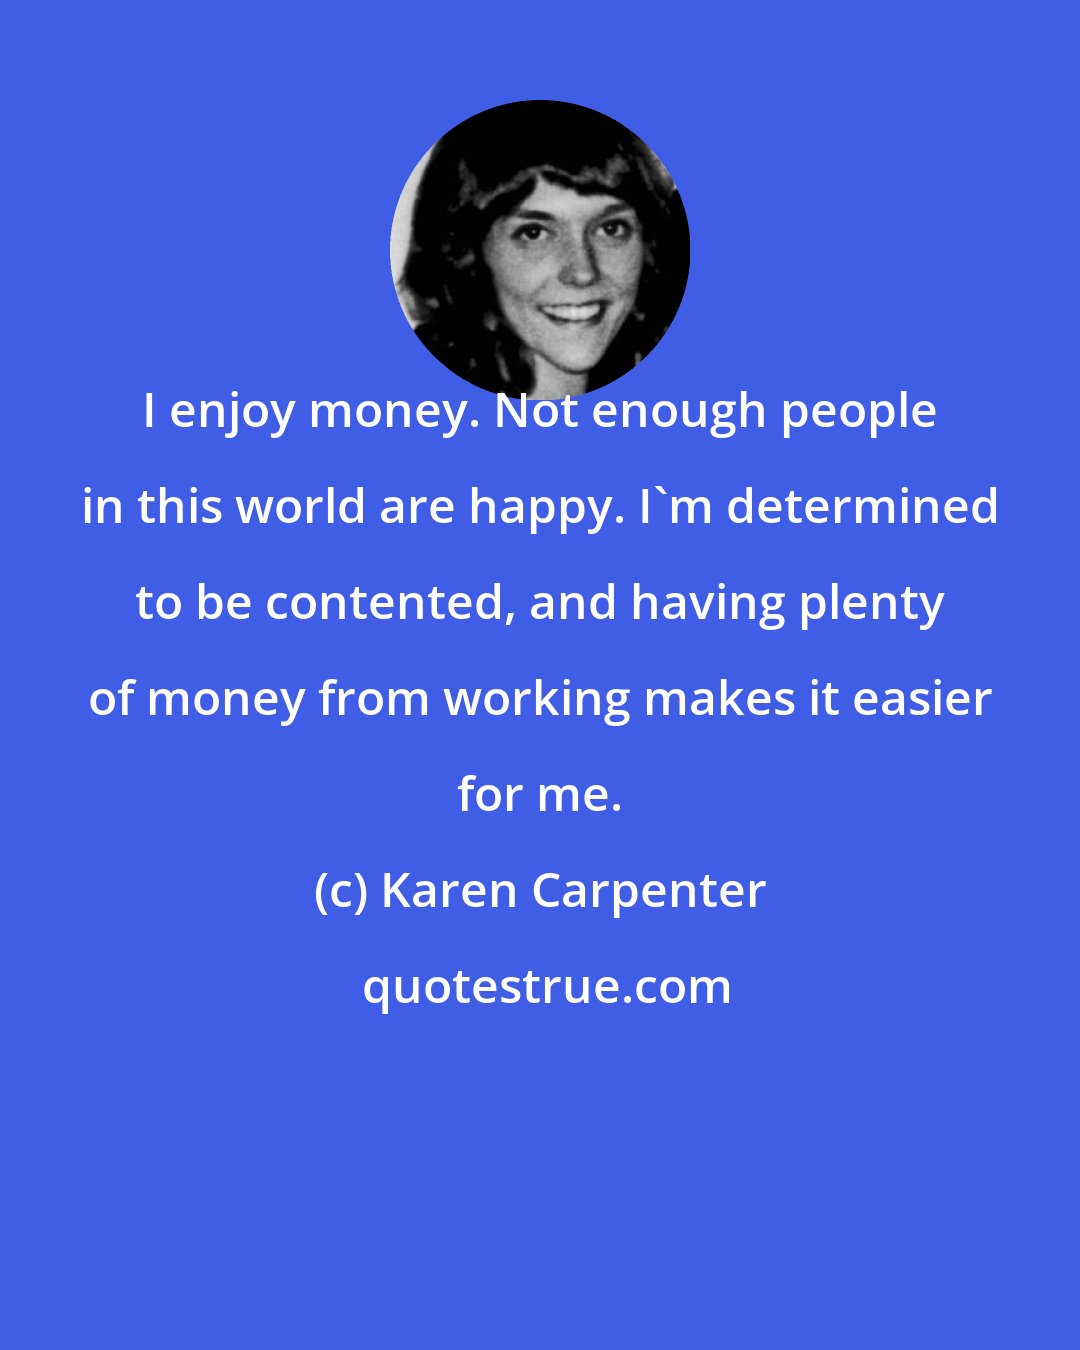 Karen Carpenter: I enjoy money. Not enough people in this world are happy. I'm determined to be contented, and having plenty of money from working makes it easier for me.